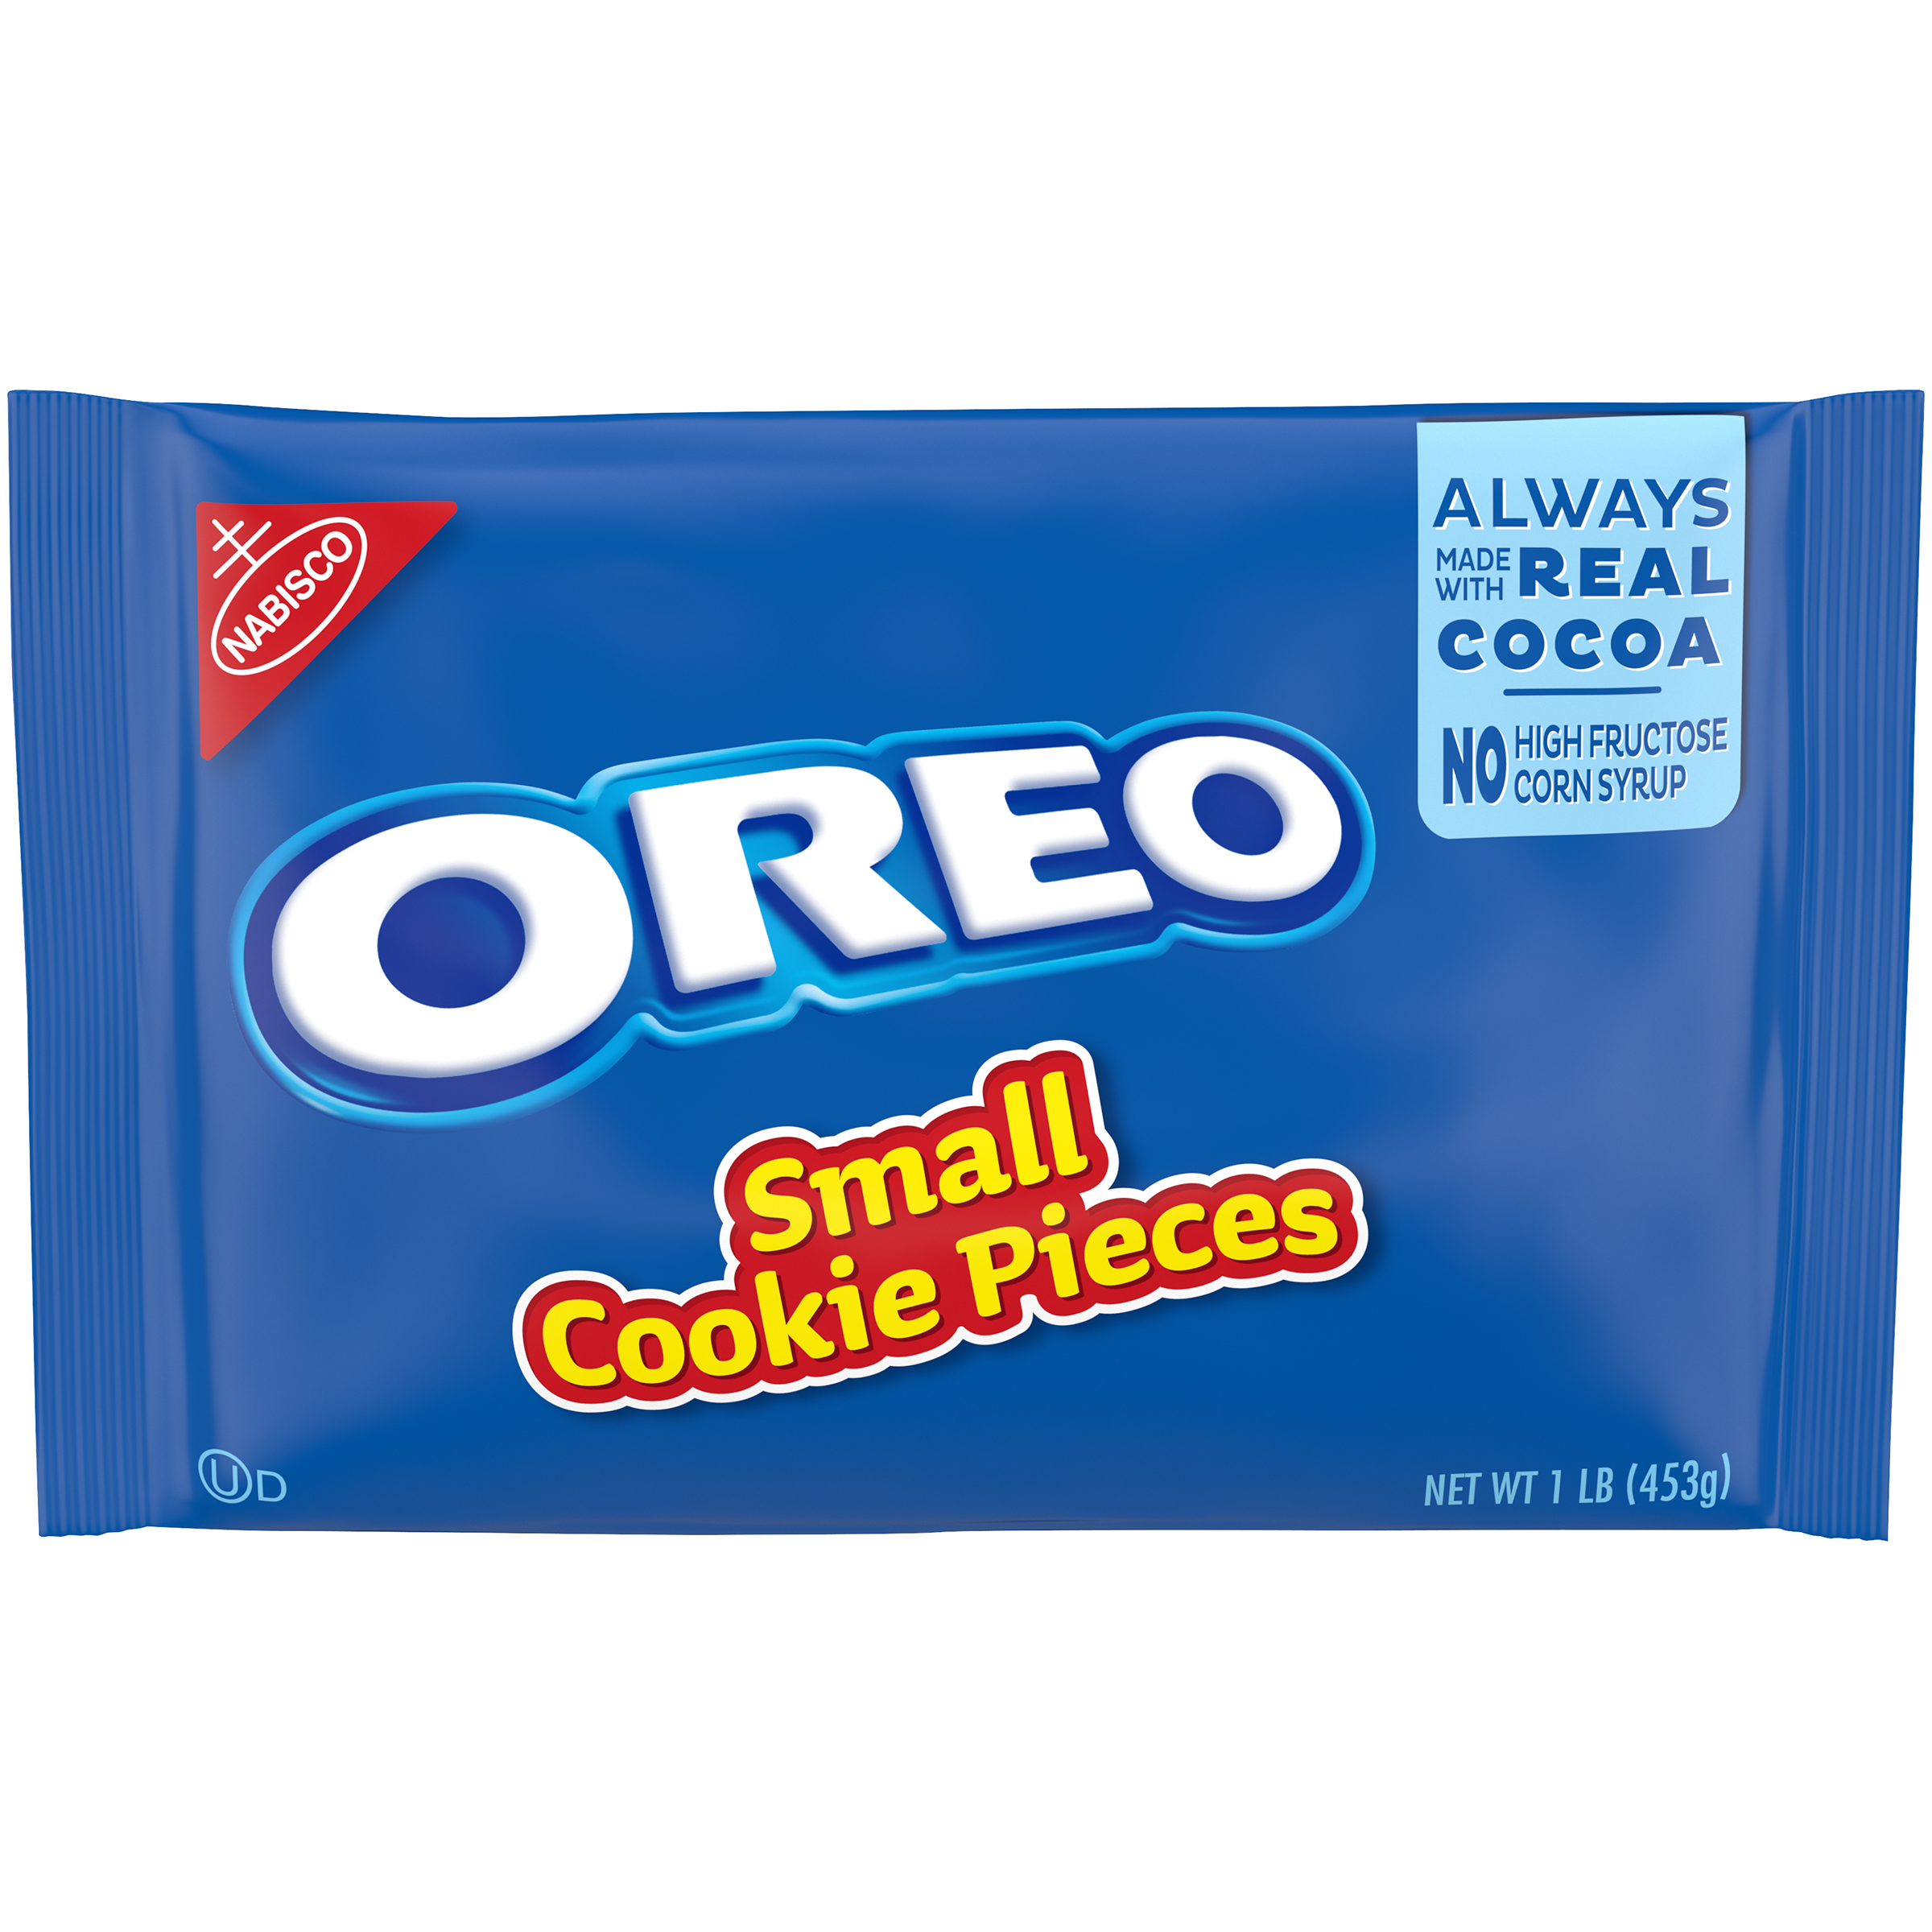 OREO Small Cookie Pieces 24/1LB